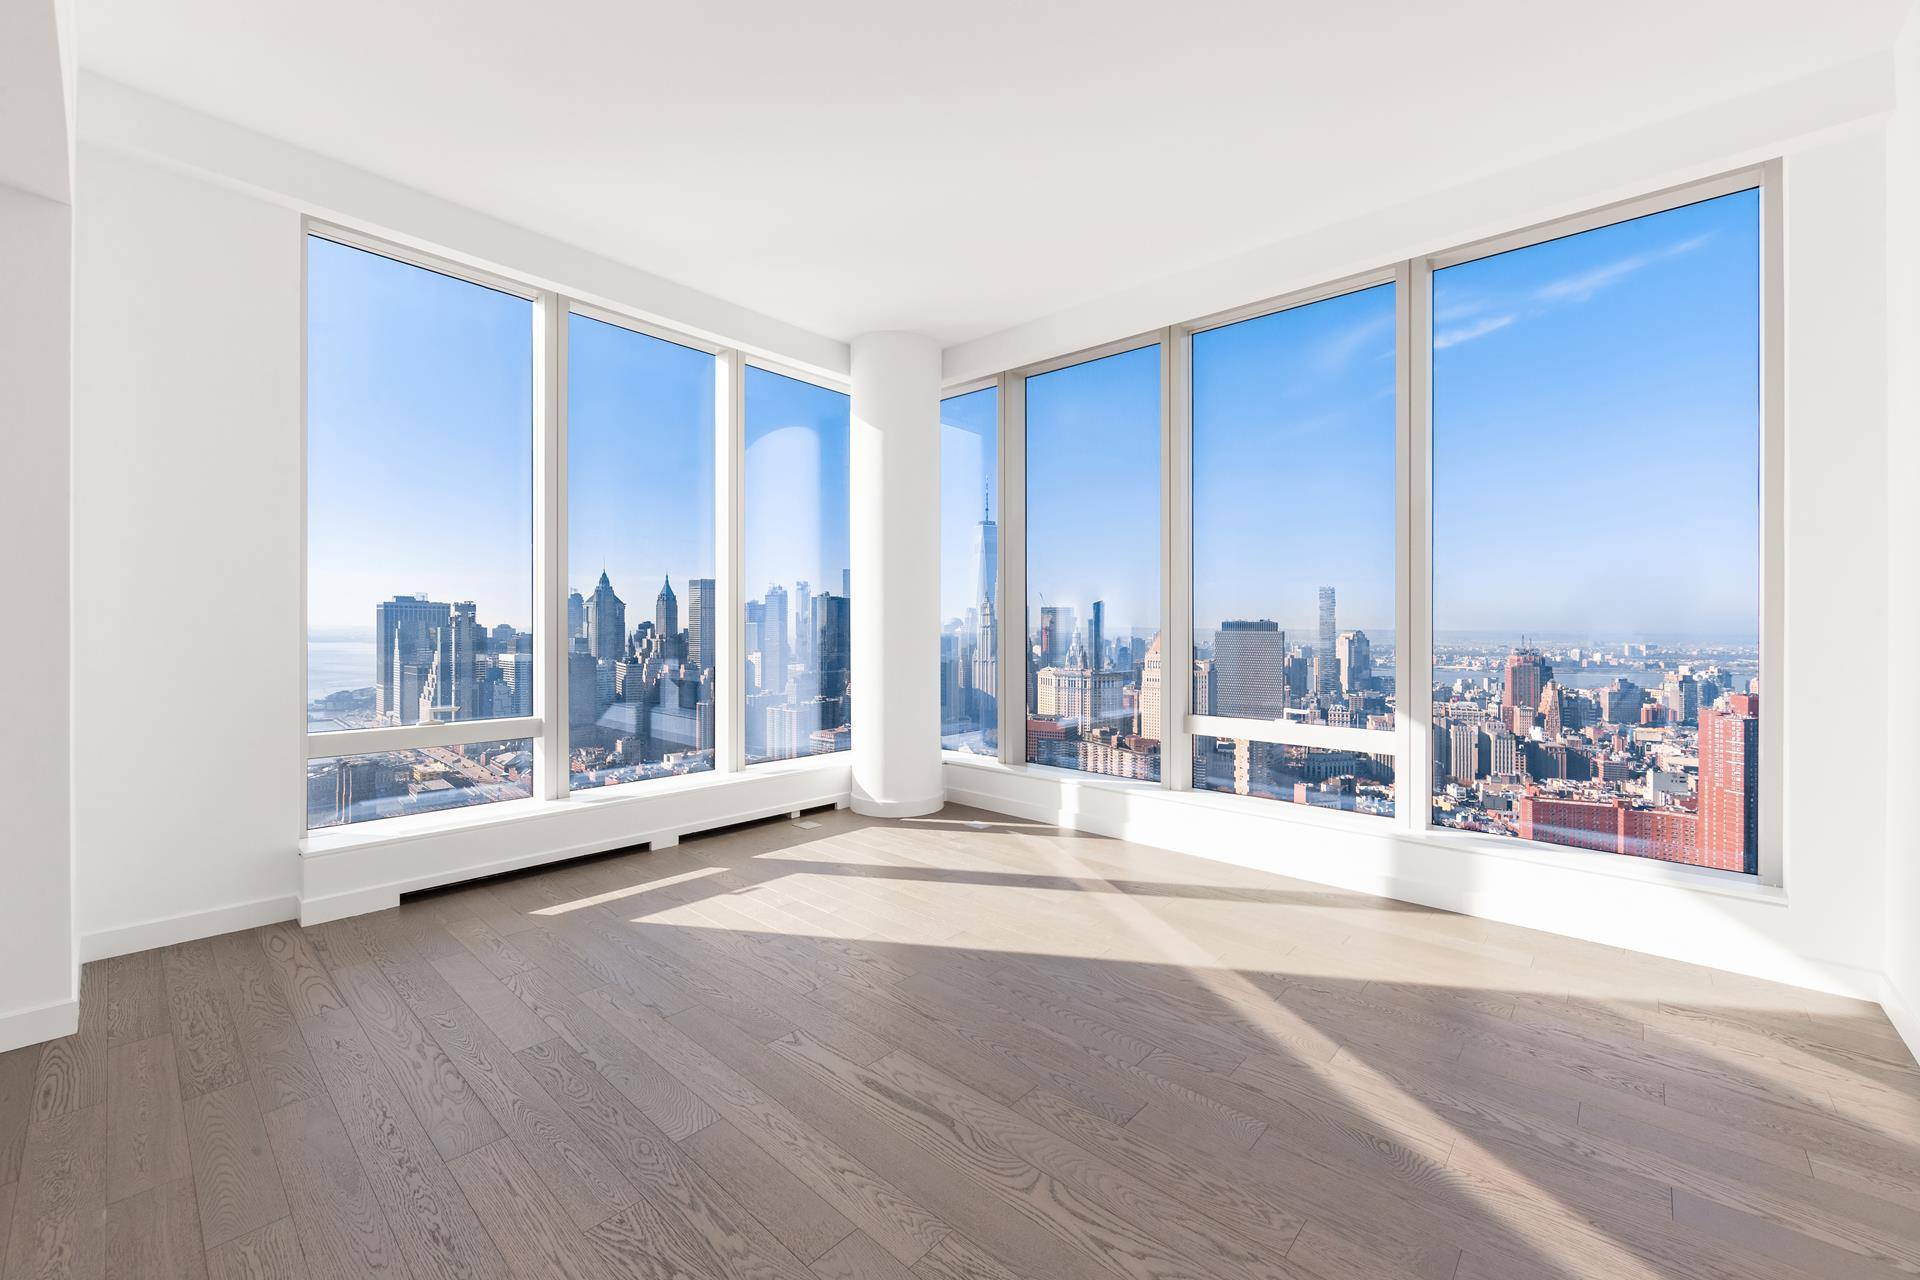 This exceptional property, situated near the top of One Manhattan Square, offers an aspect unlike any other.